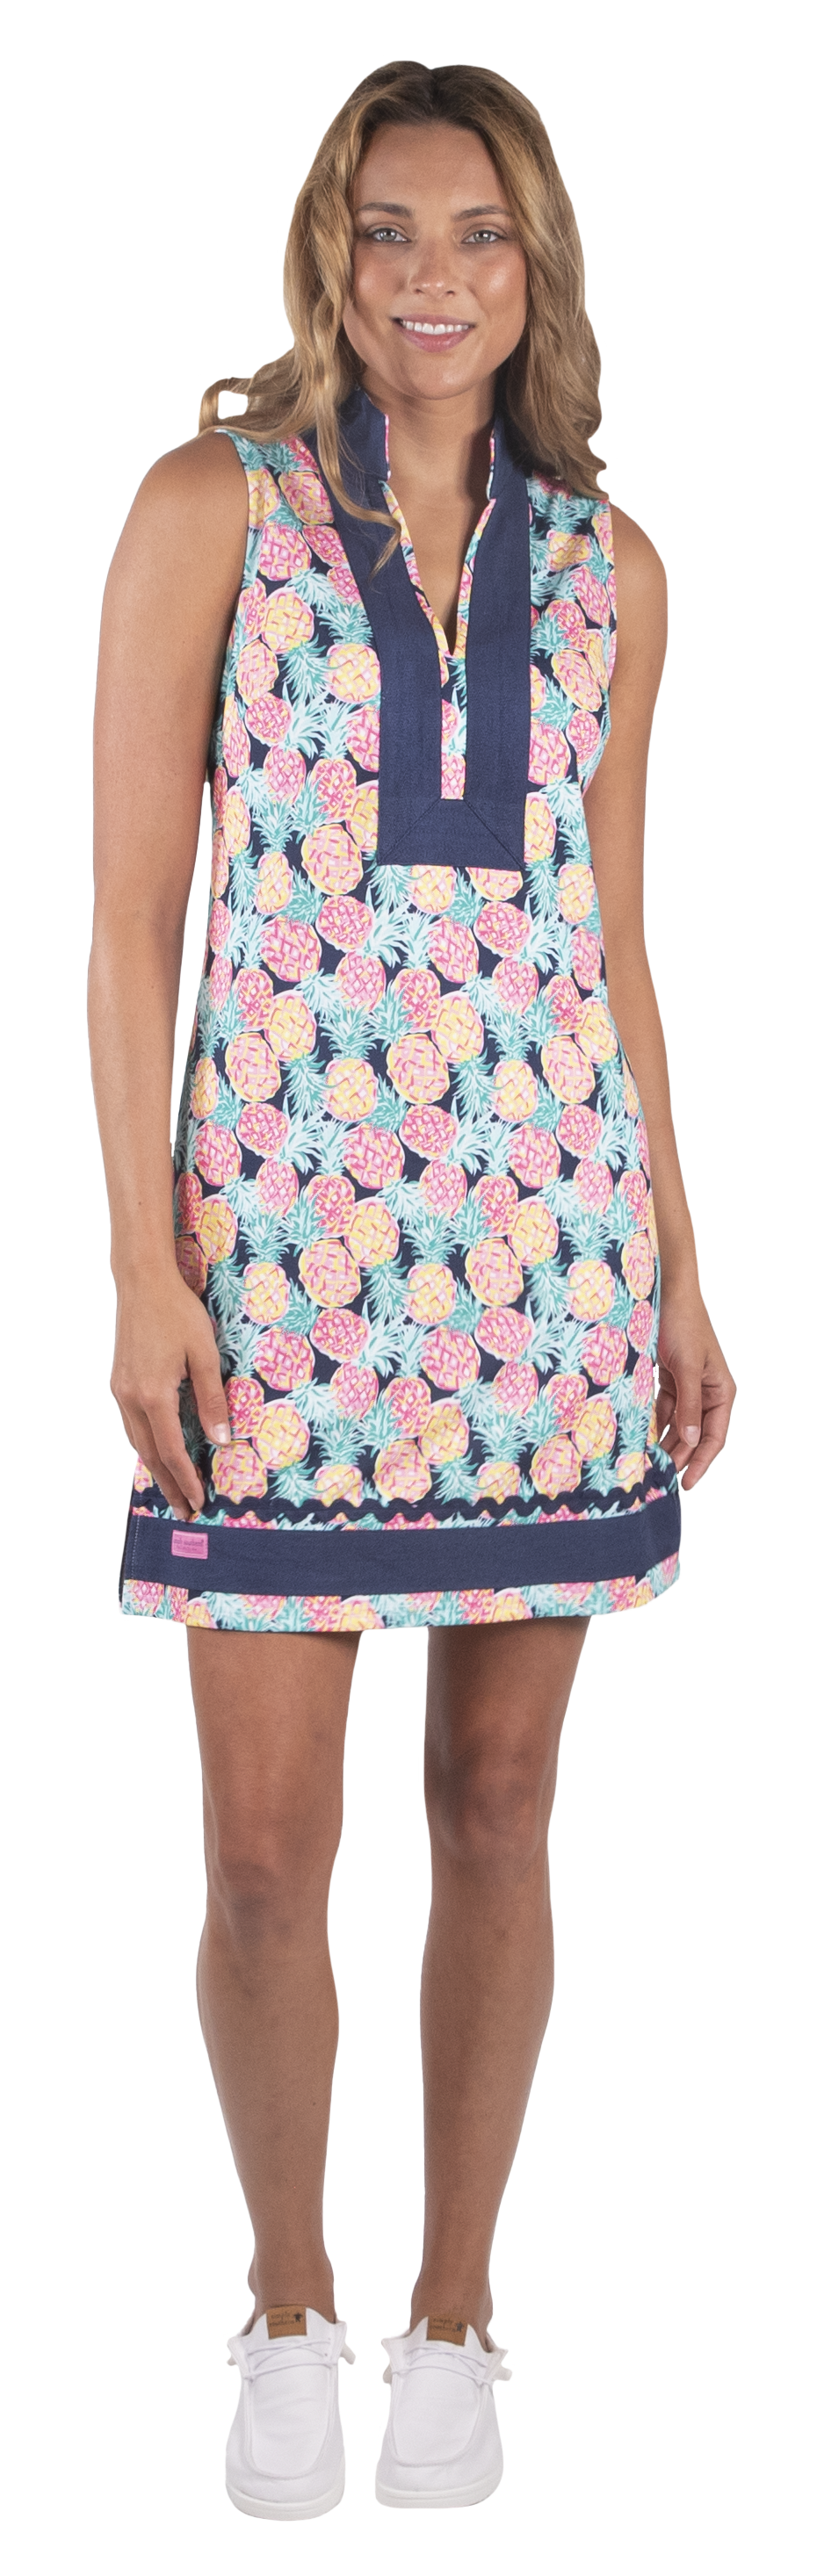 Pineapple Preppy Tunic Dress by Simply Southern